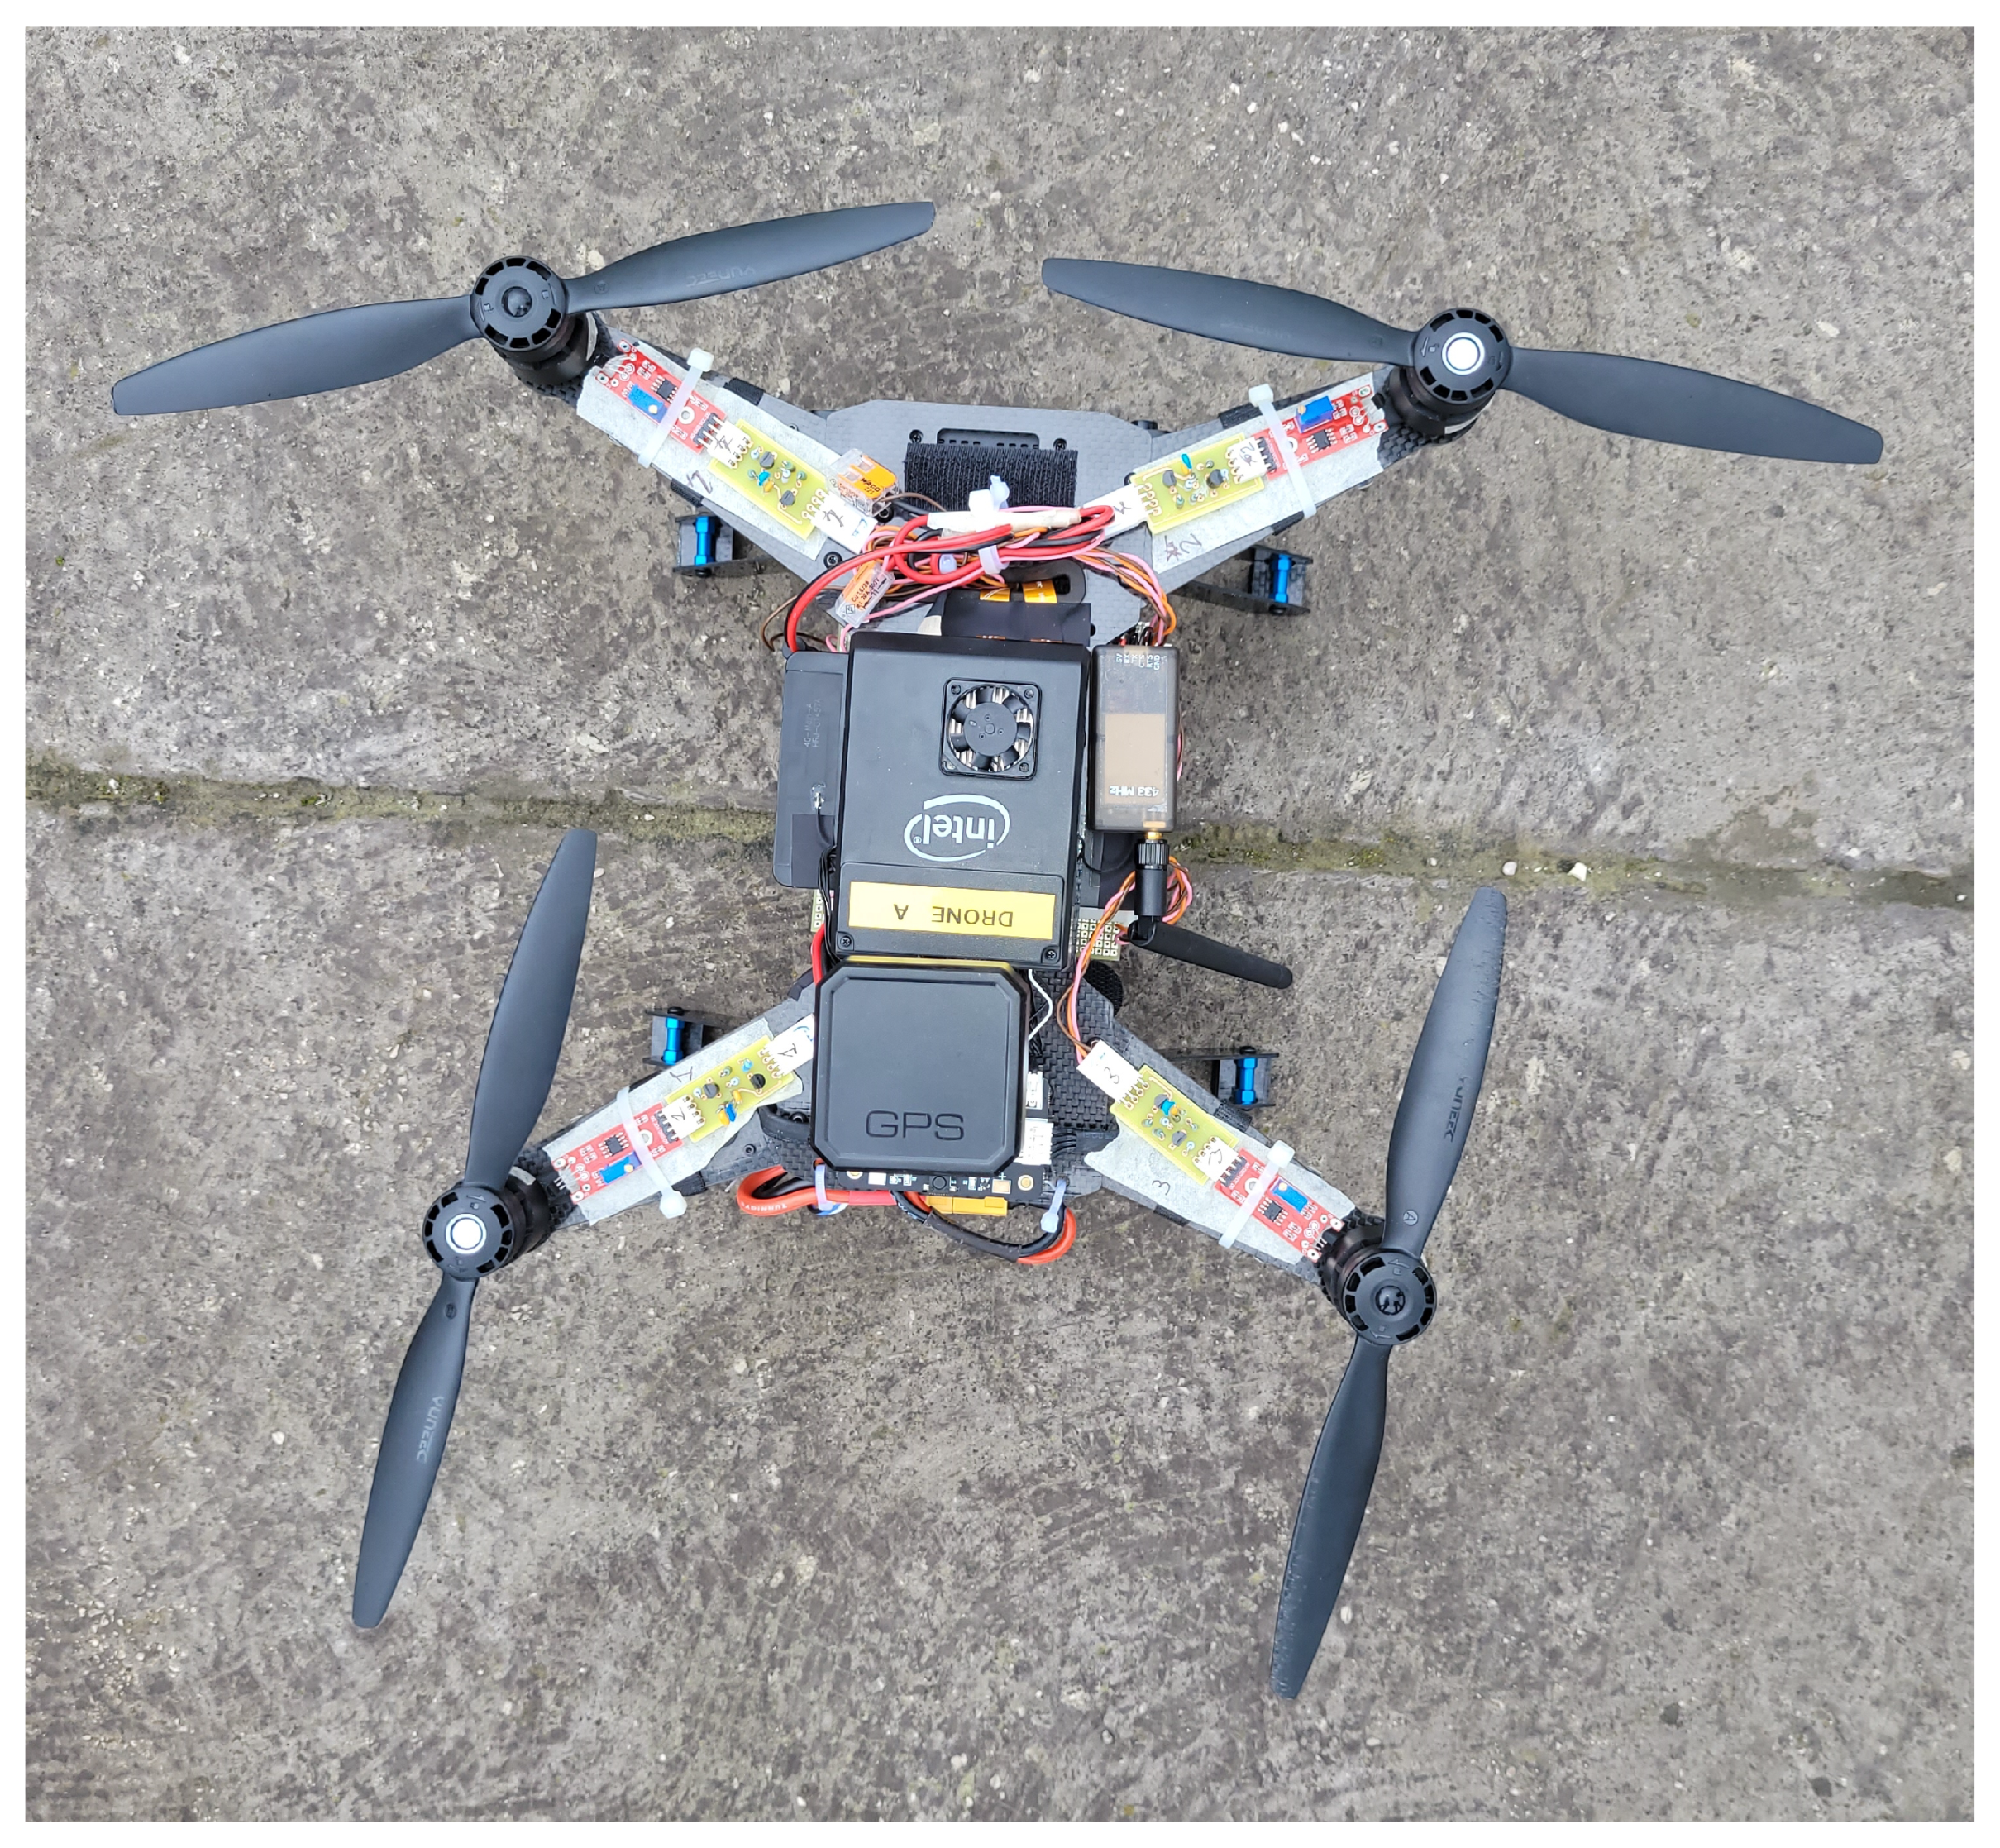 Introduction to Multicopter Design and C